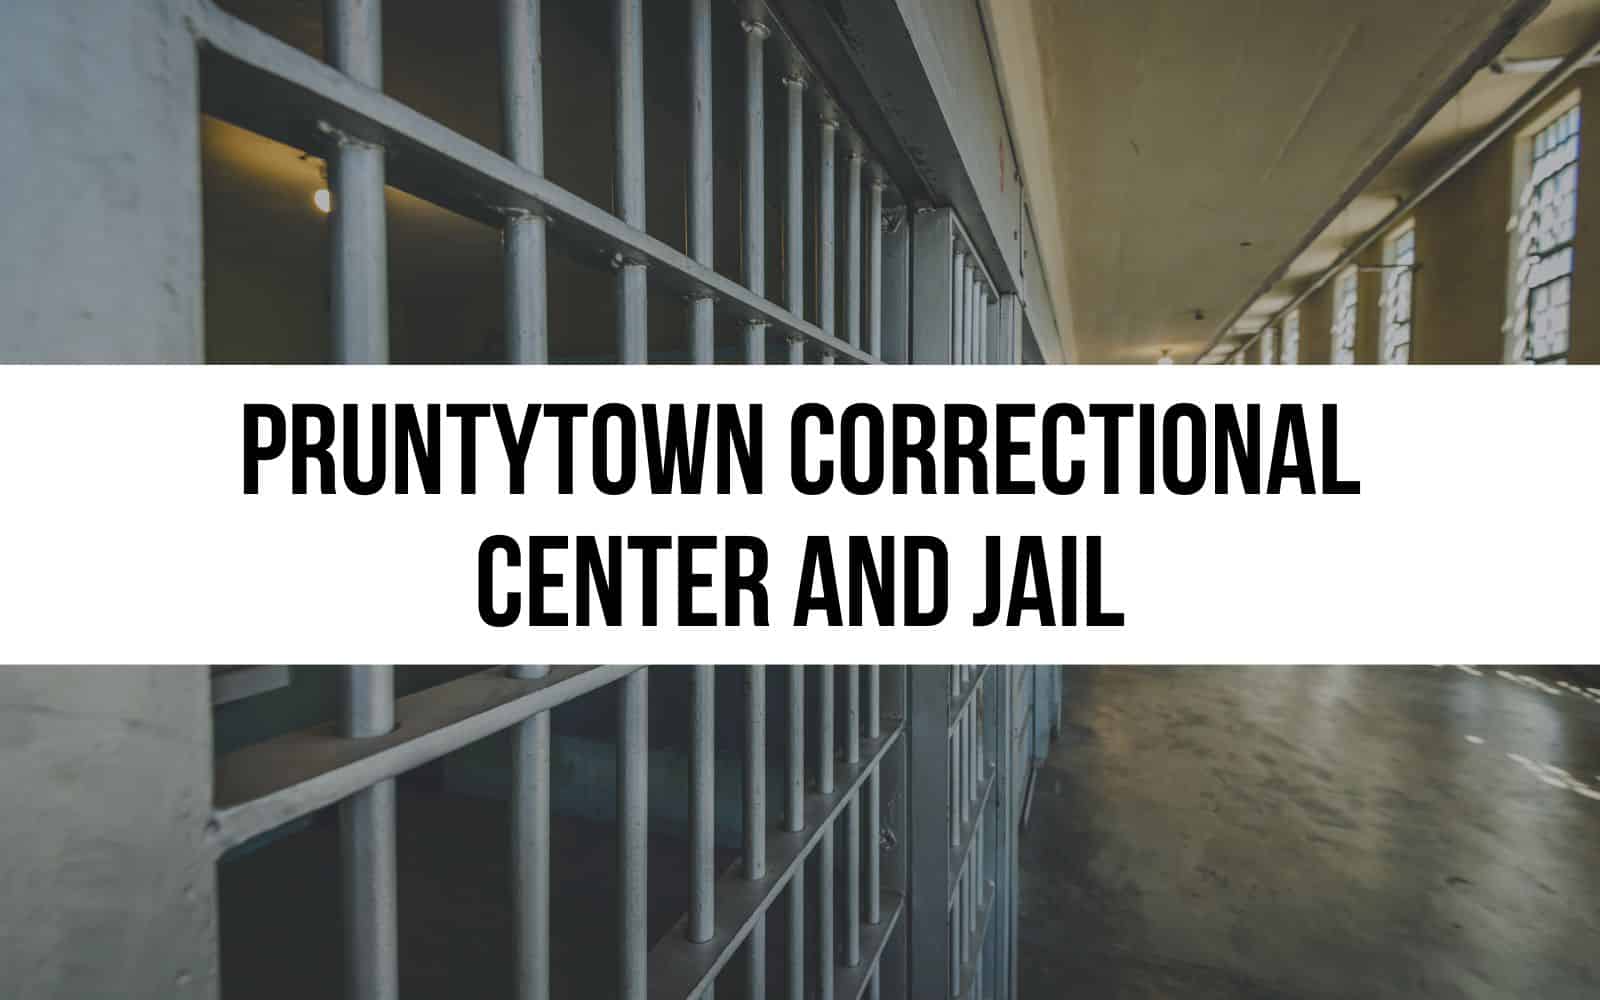 Pruntytown Correctional Center and Jail